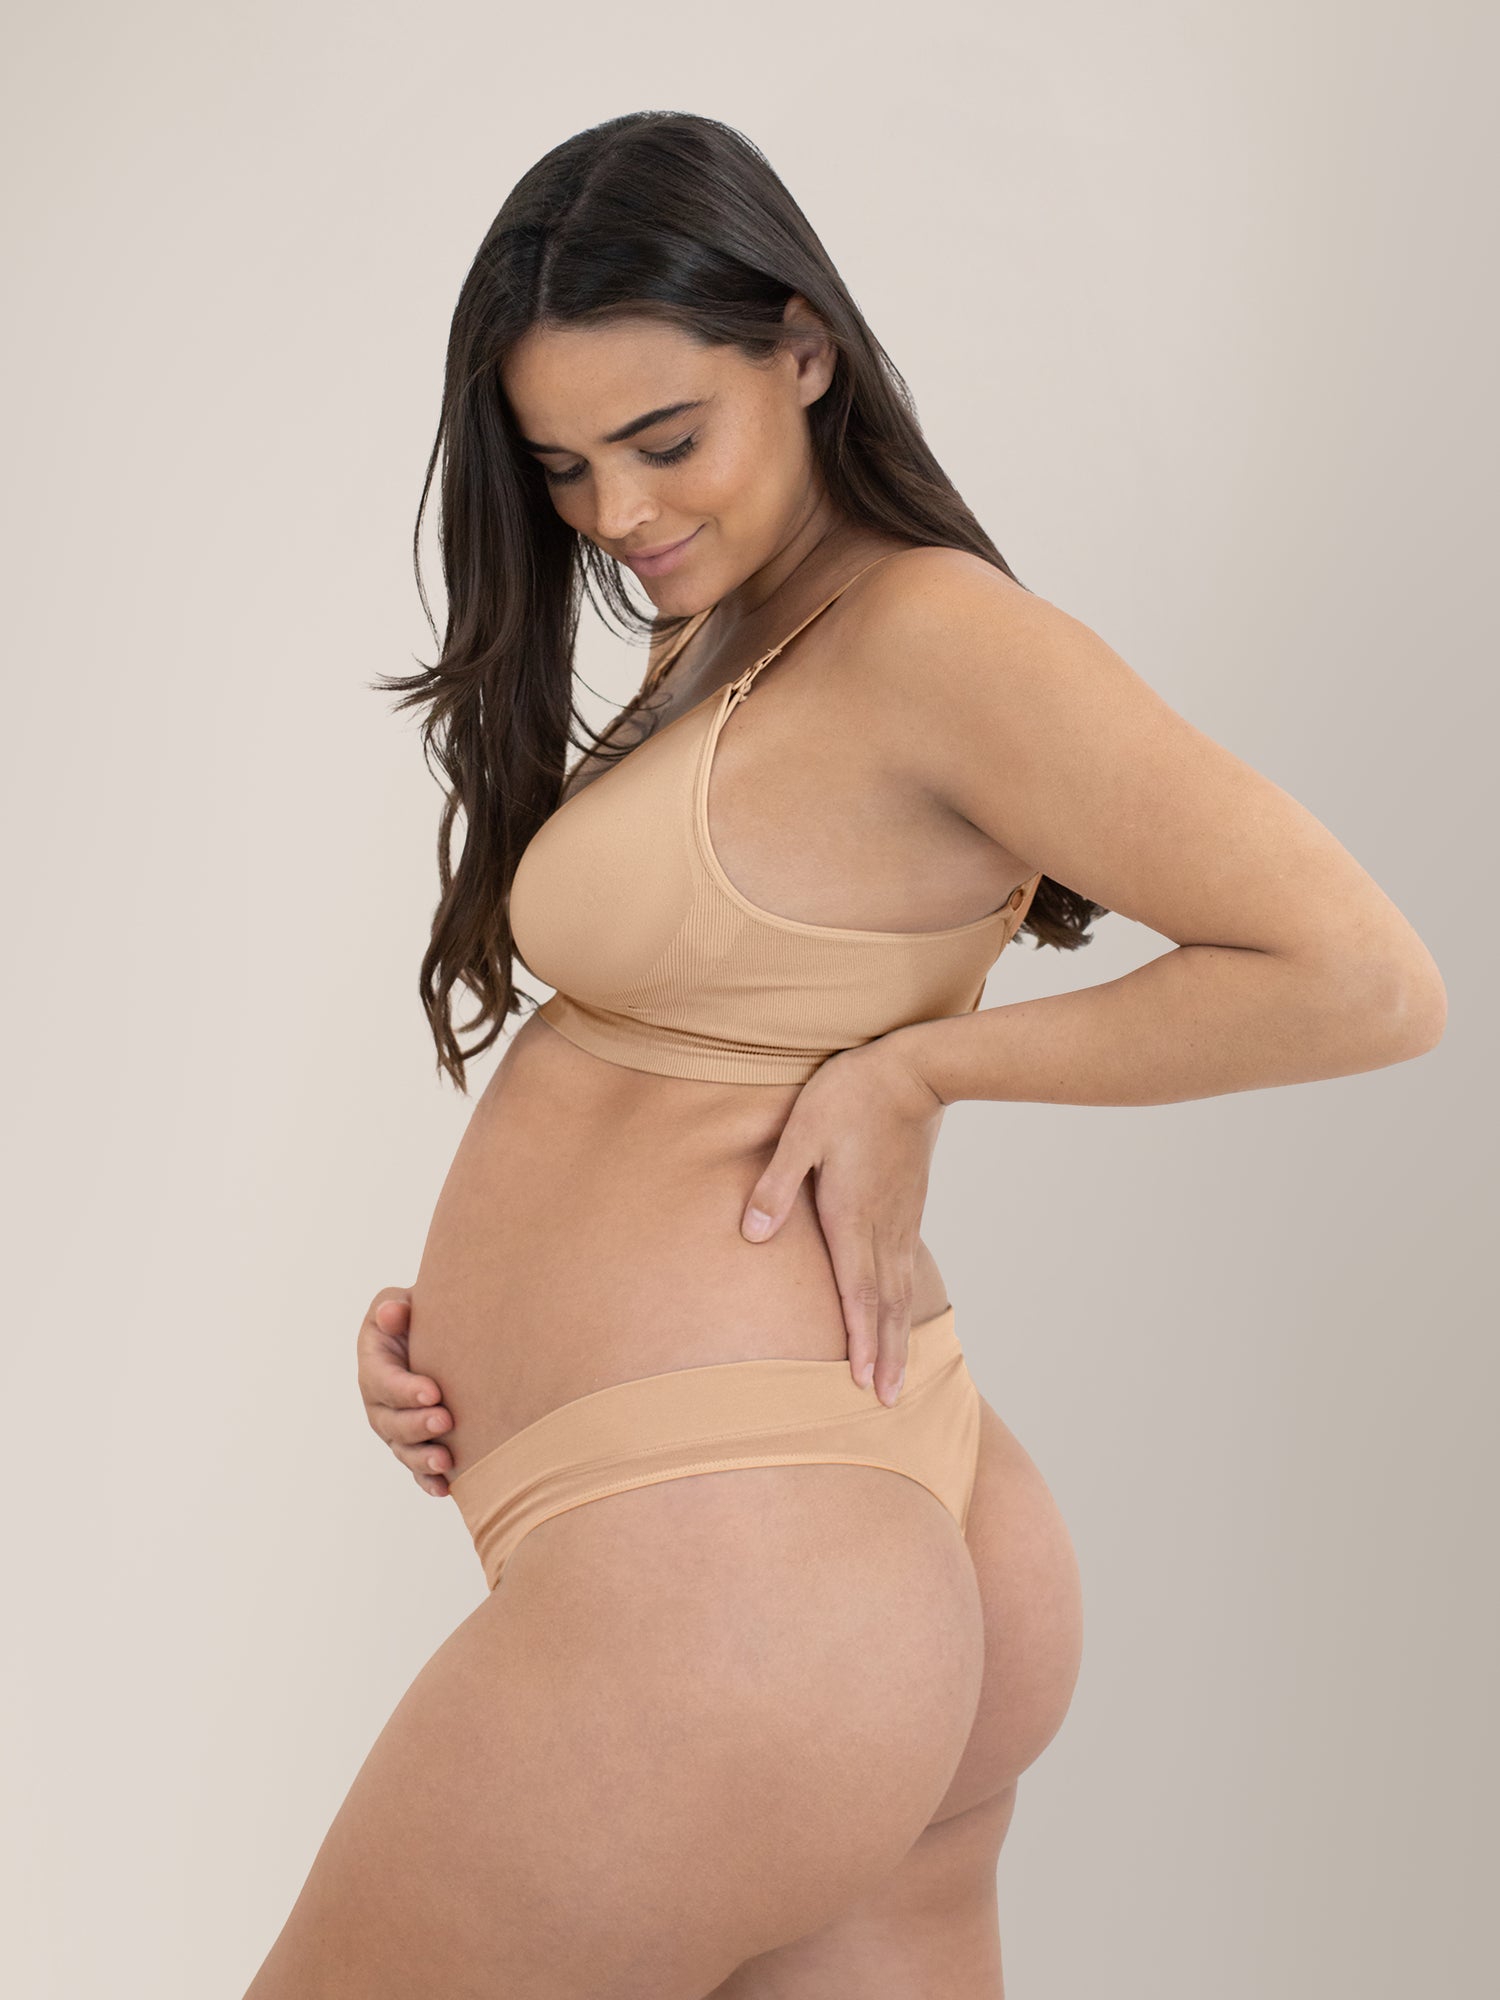 Pregnant model wearing the Bamboo Maternity & Postpartum Thong in Beige with her hand on her stomach and the middle of her back.